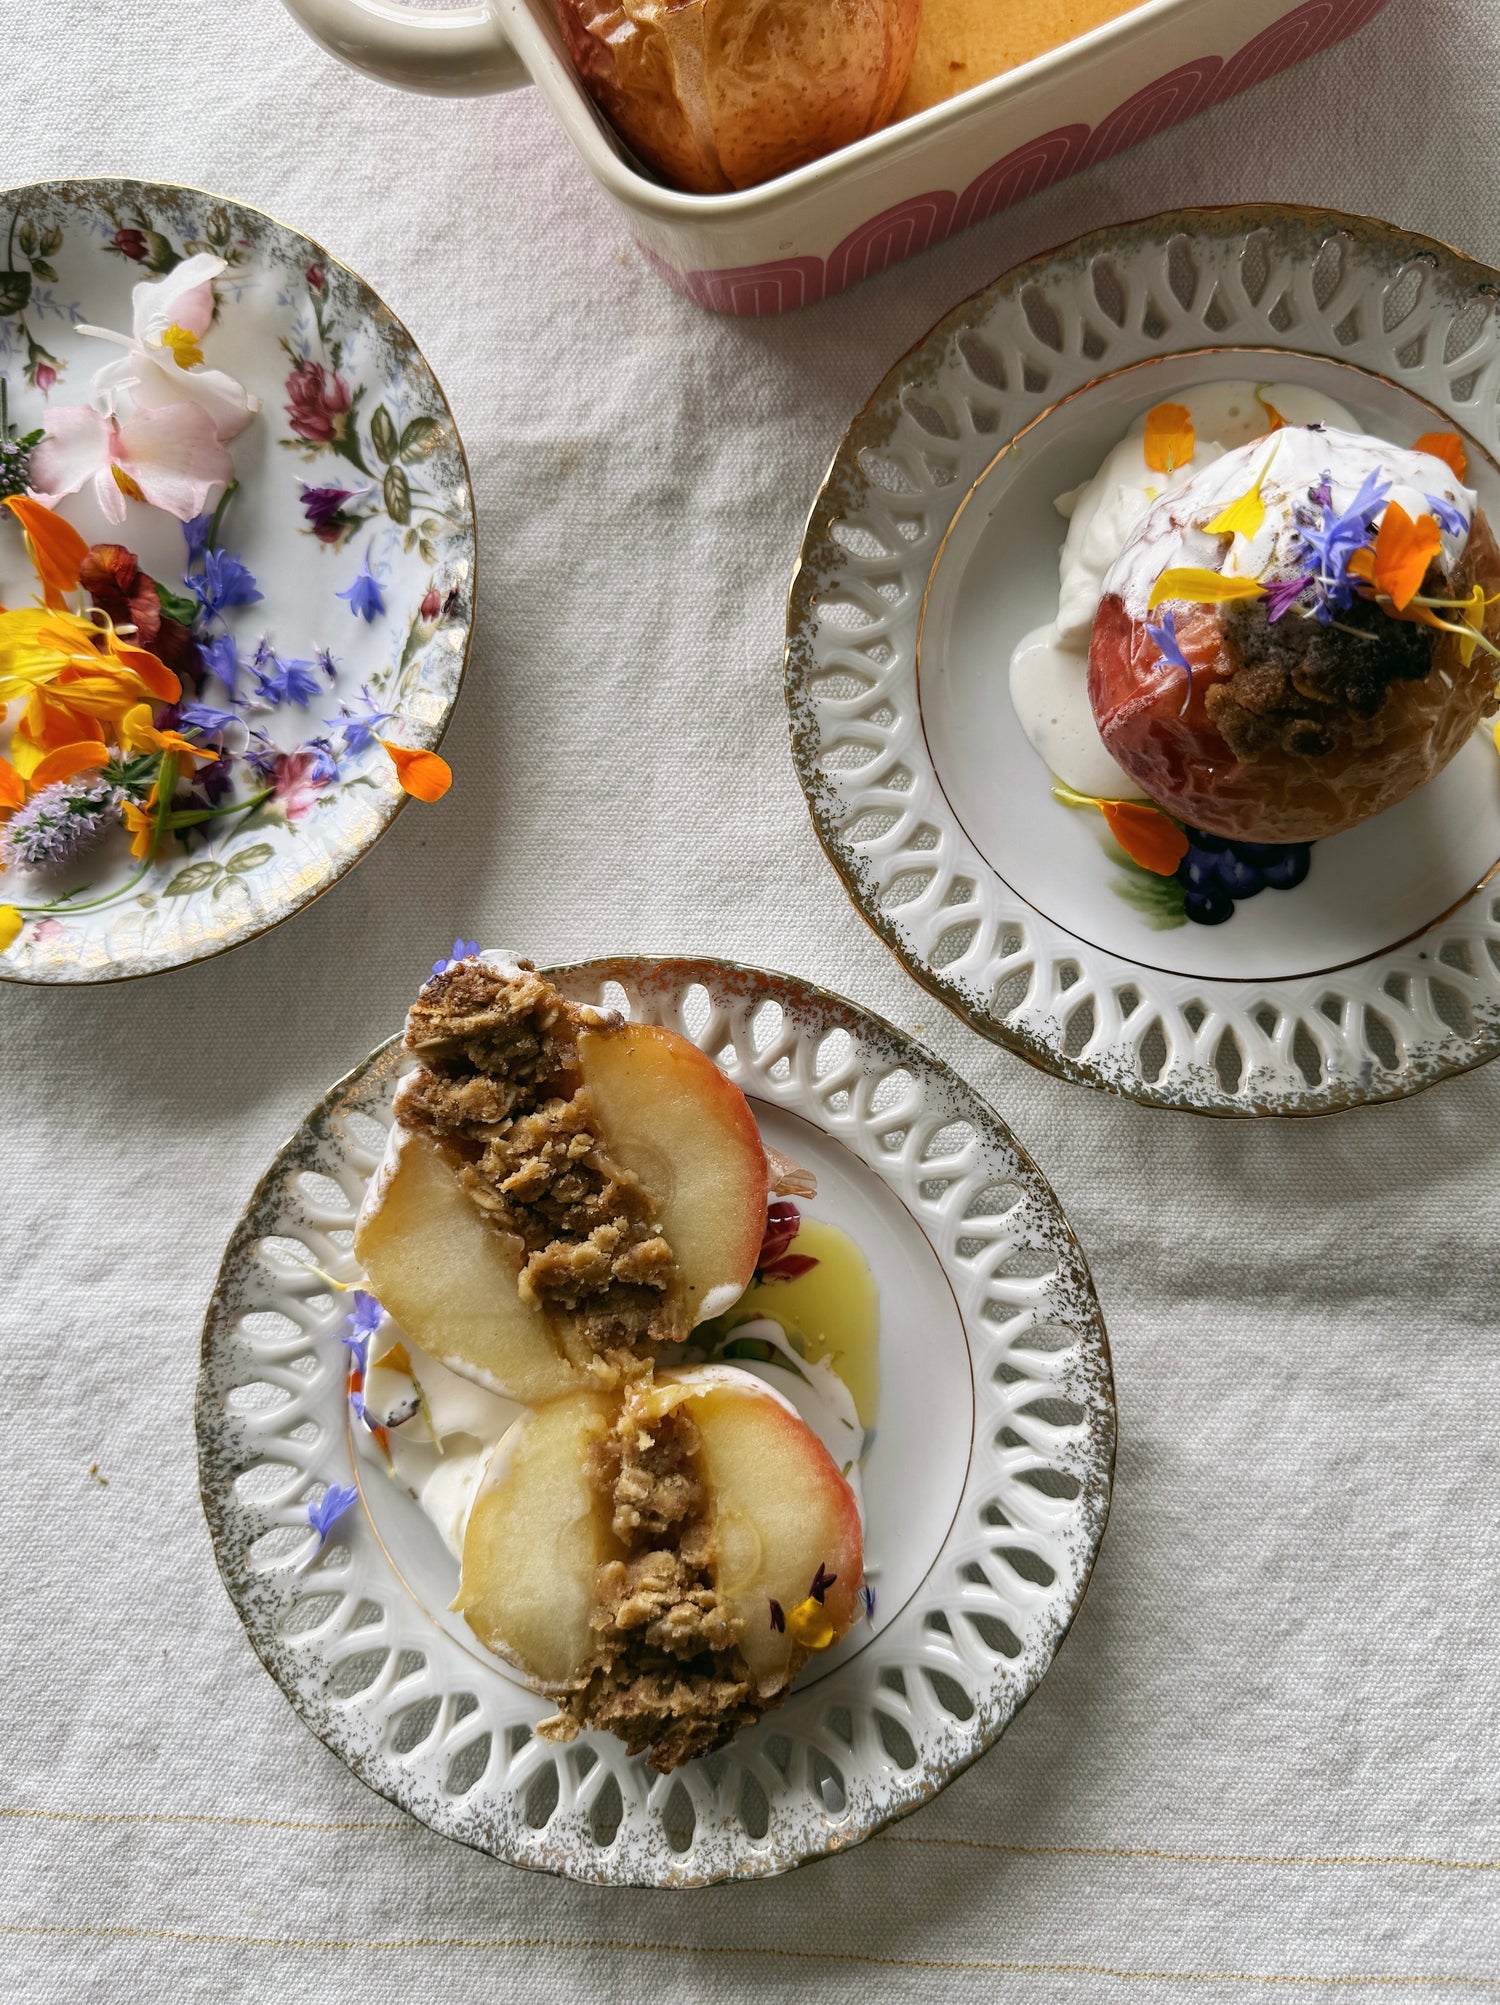 Baked Apples with Oat Crumble